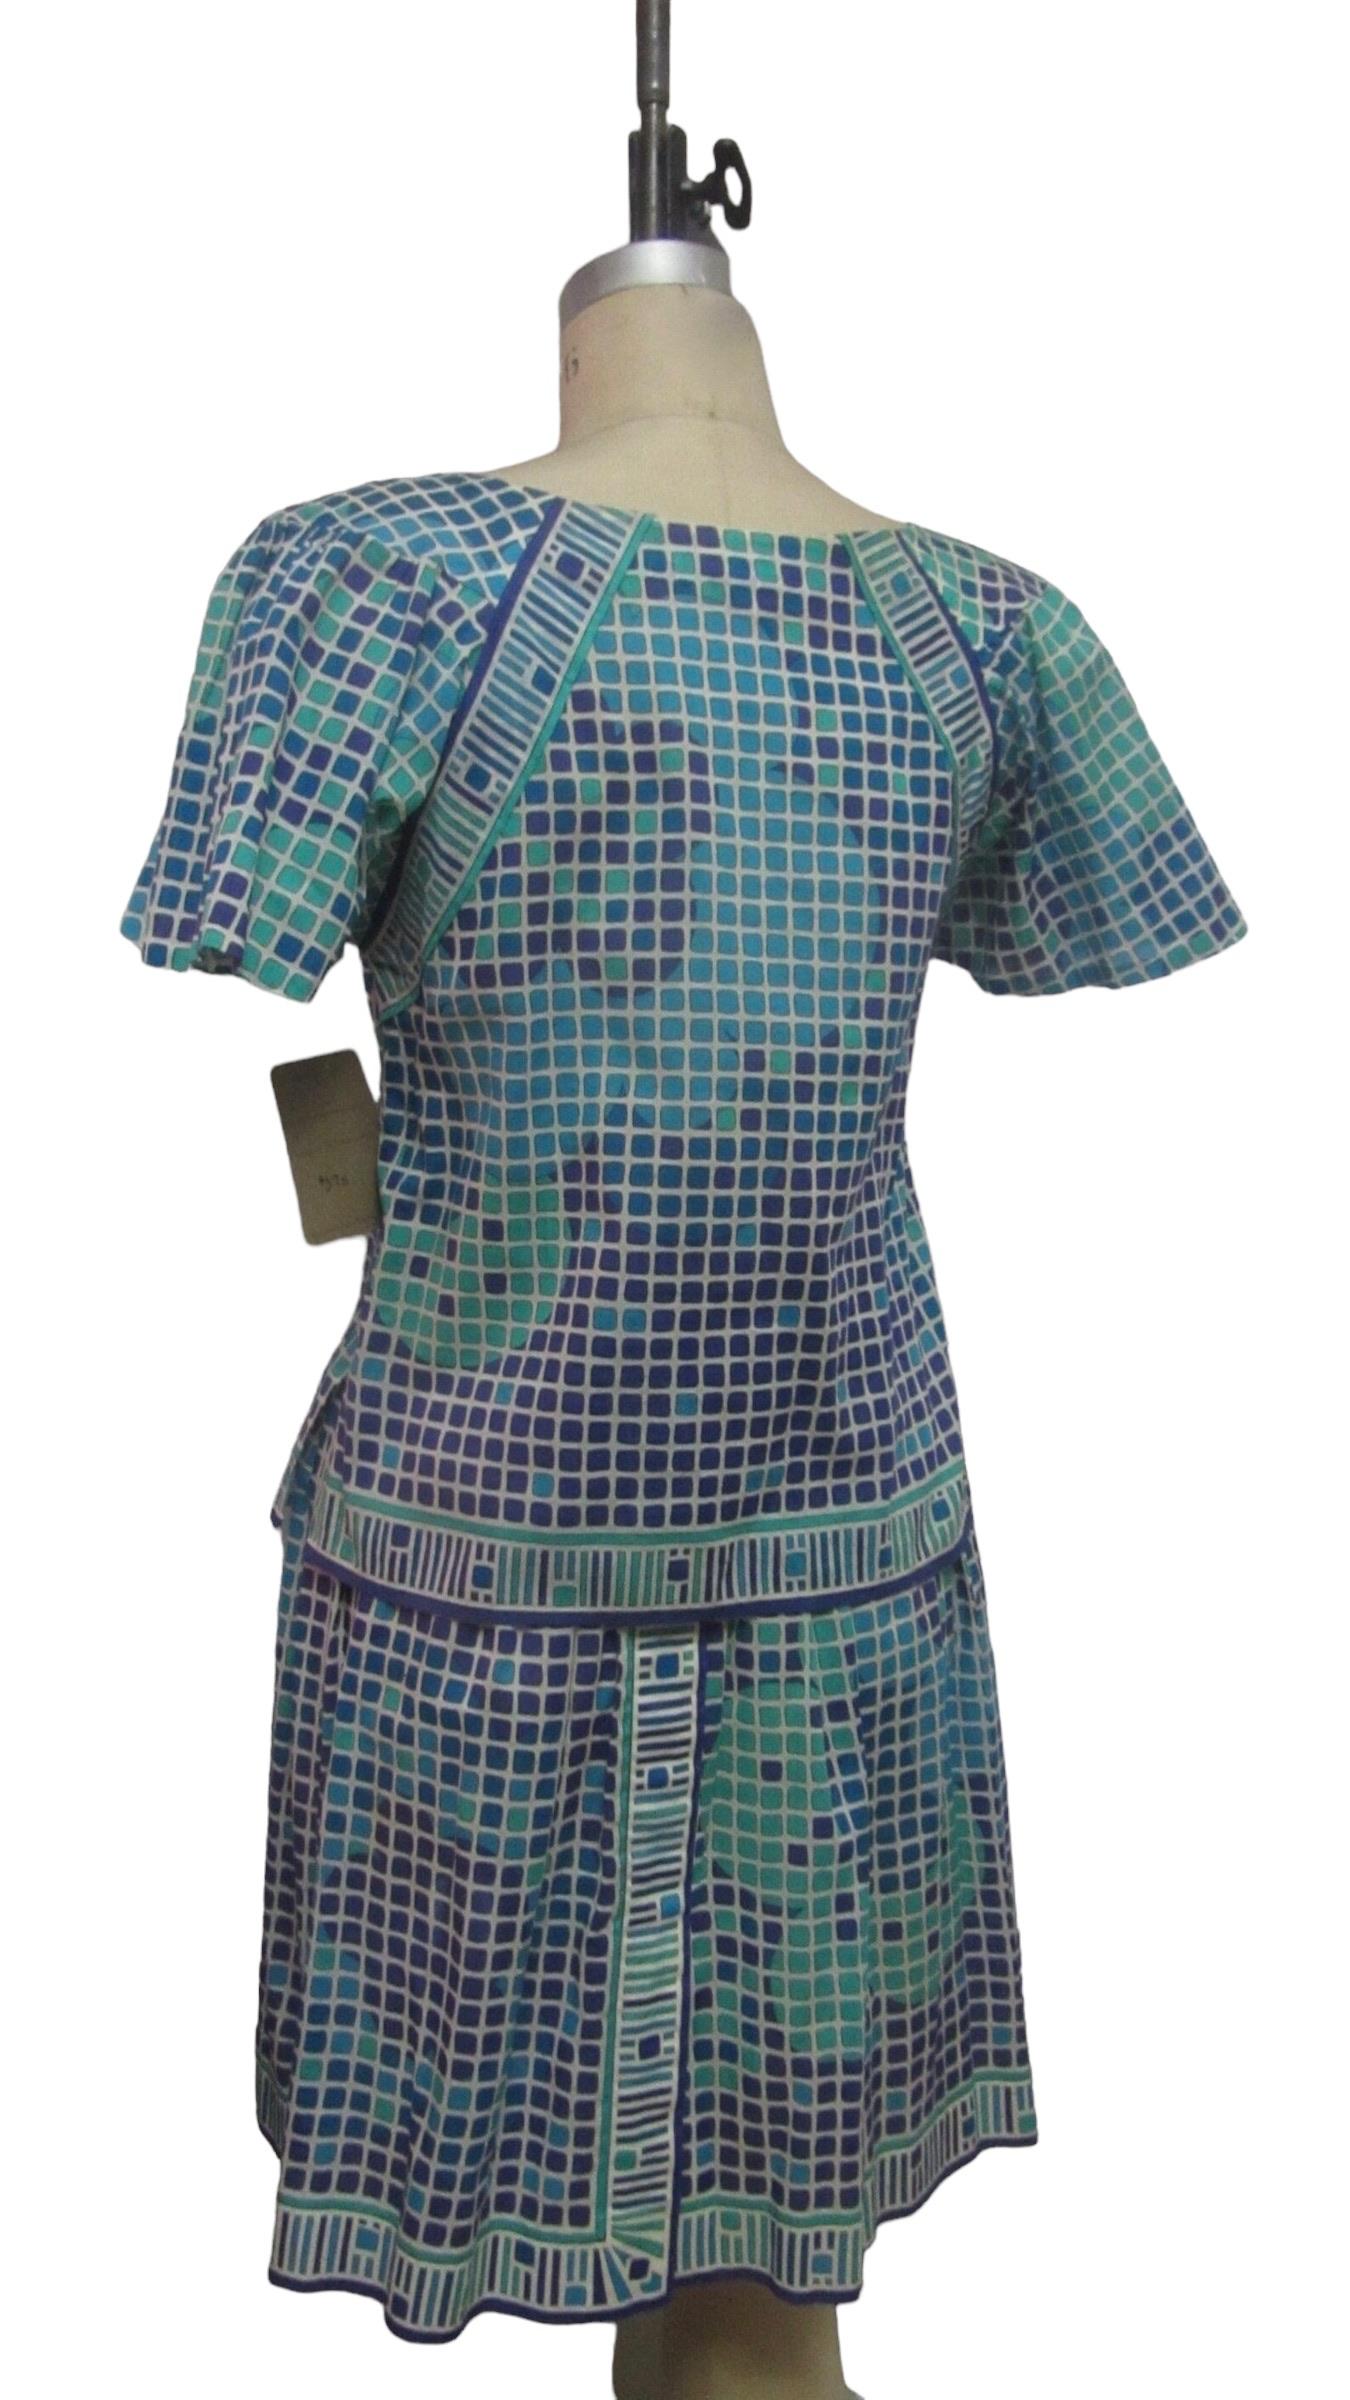 Emilio Pucci Cotton Geometric Print Top and Skirt Set, Circa 1960s For Sale 3